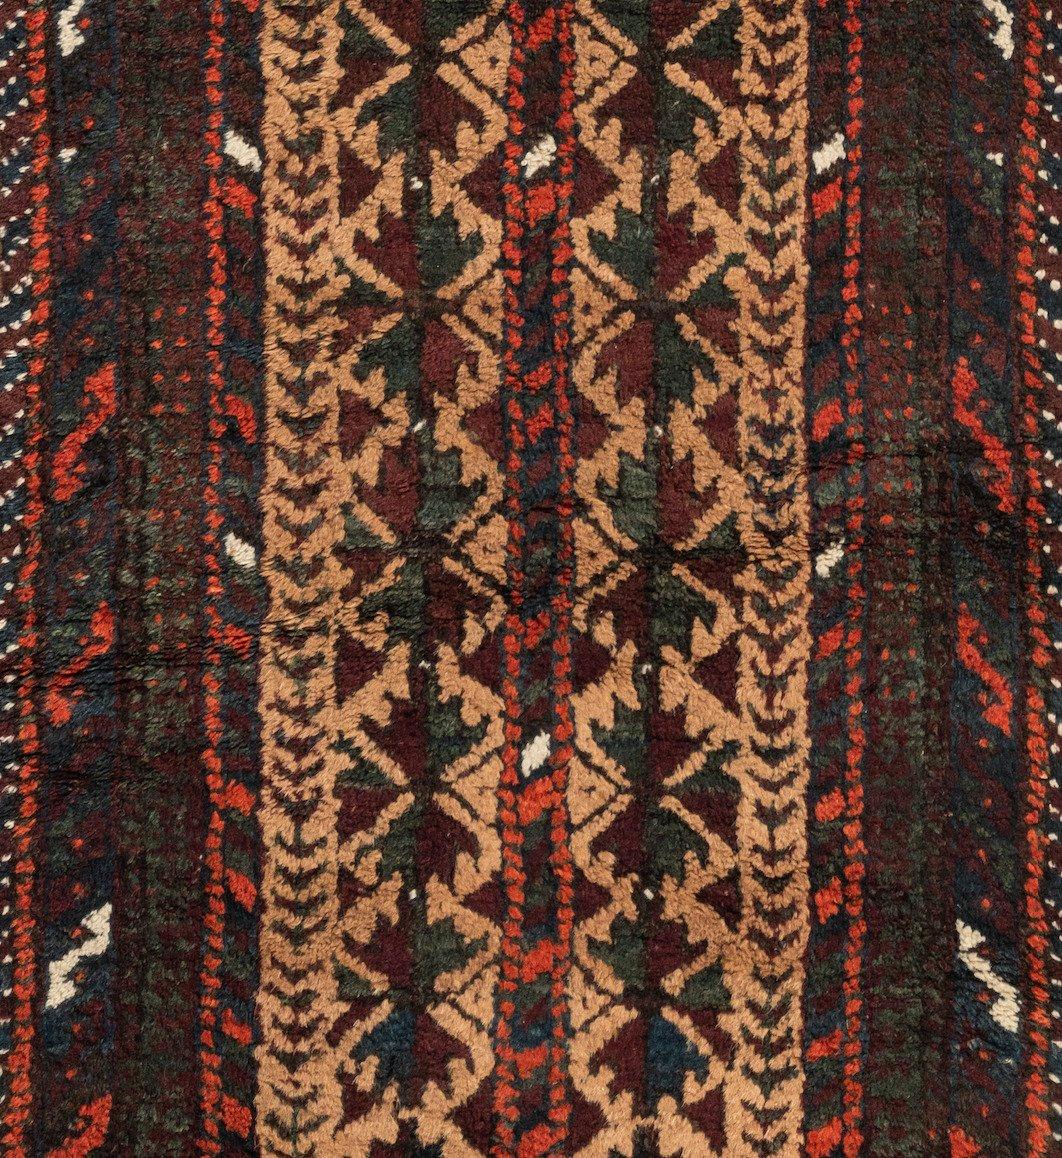 Baluch carpets are handmade carpets originally made by Baluch nomads, living near the border between Iran, Pakistan and Afghanistan. The carpets are often small with lively patterns, and praying carpets are common. The dominating colors are red,